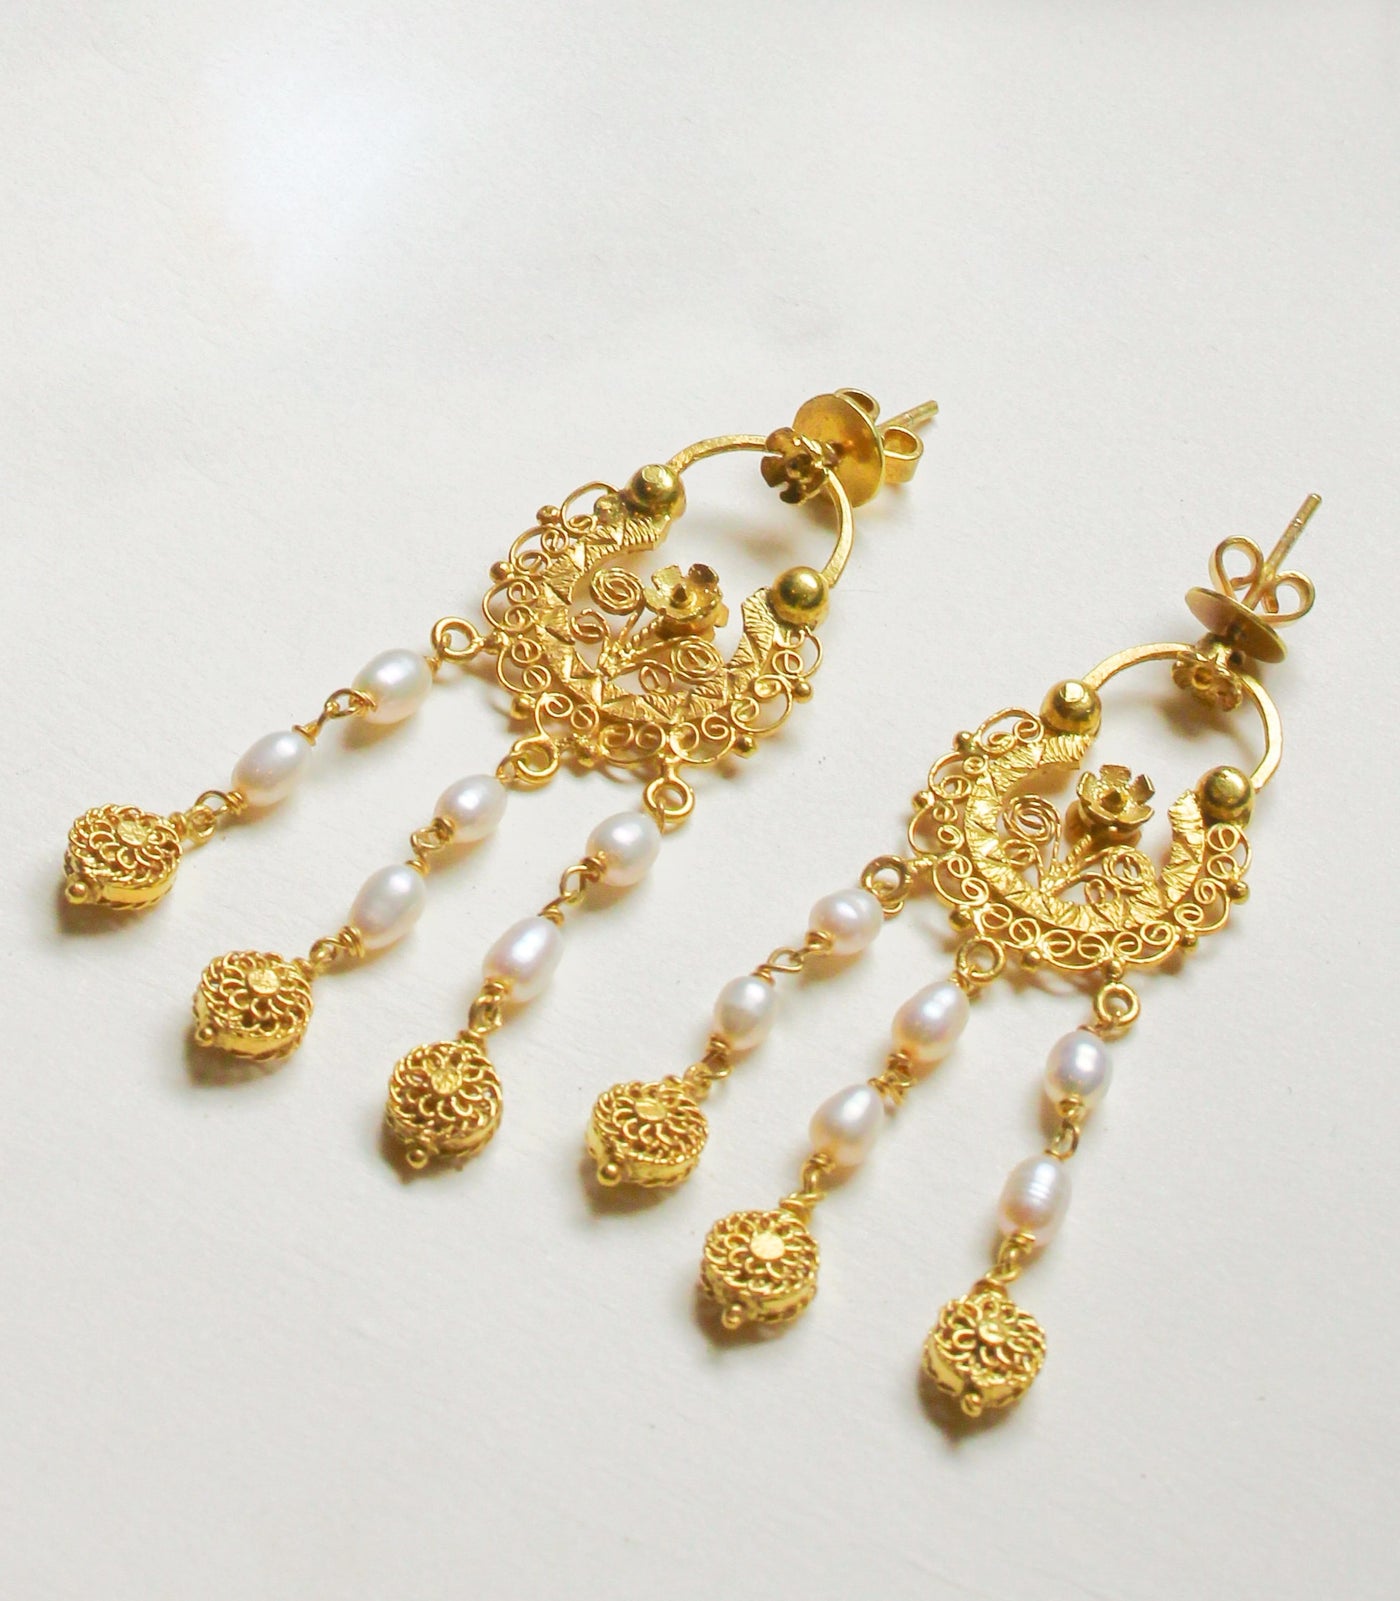 Dominique Pearl Creolla Earrings - AMAMI